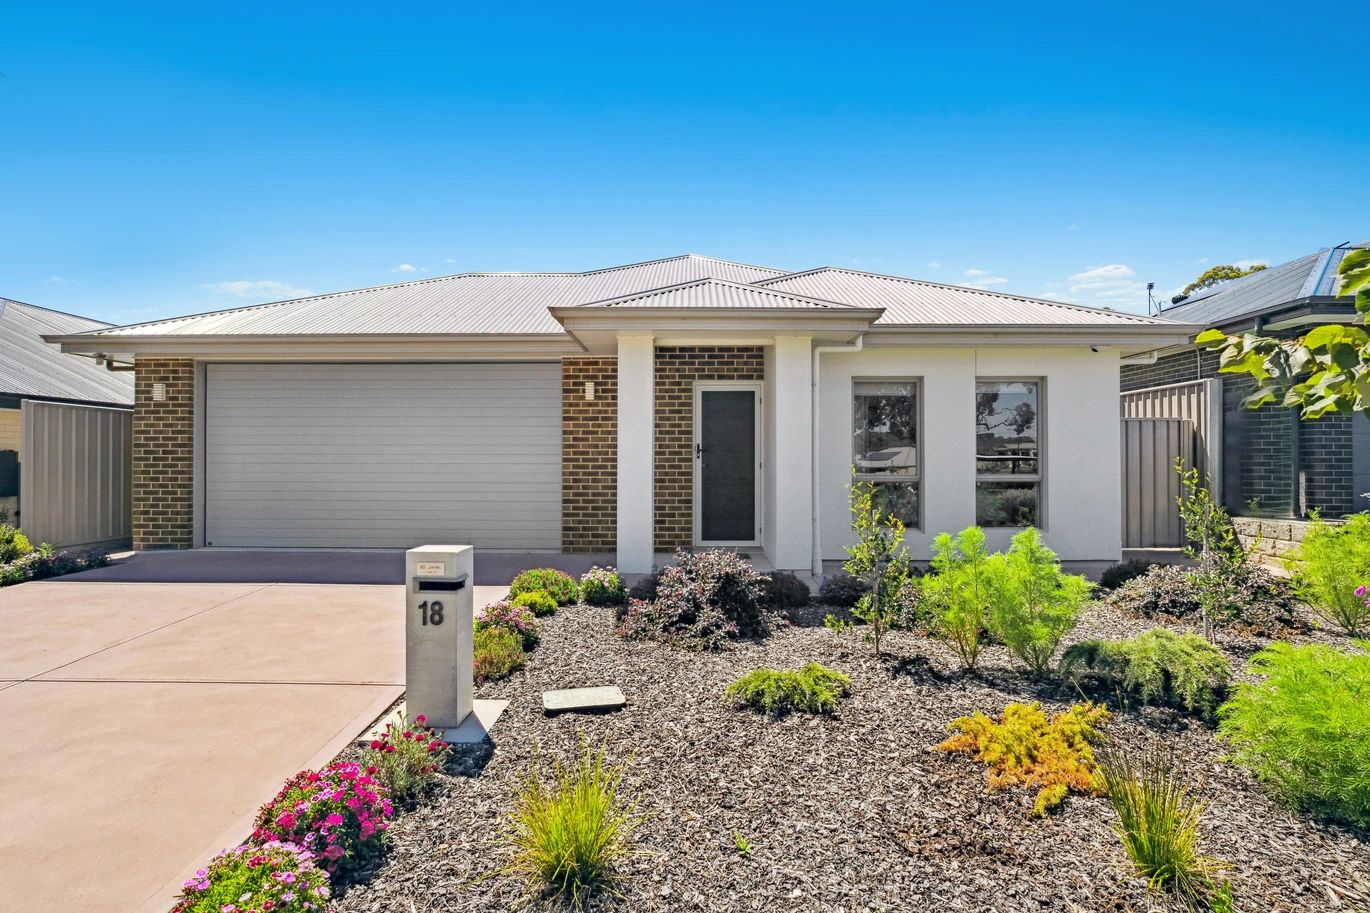 4 bedrooms House in 18 Swallowtail Street MOUNT BARKER SA, 5251